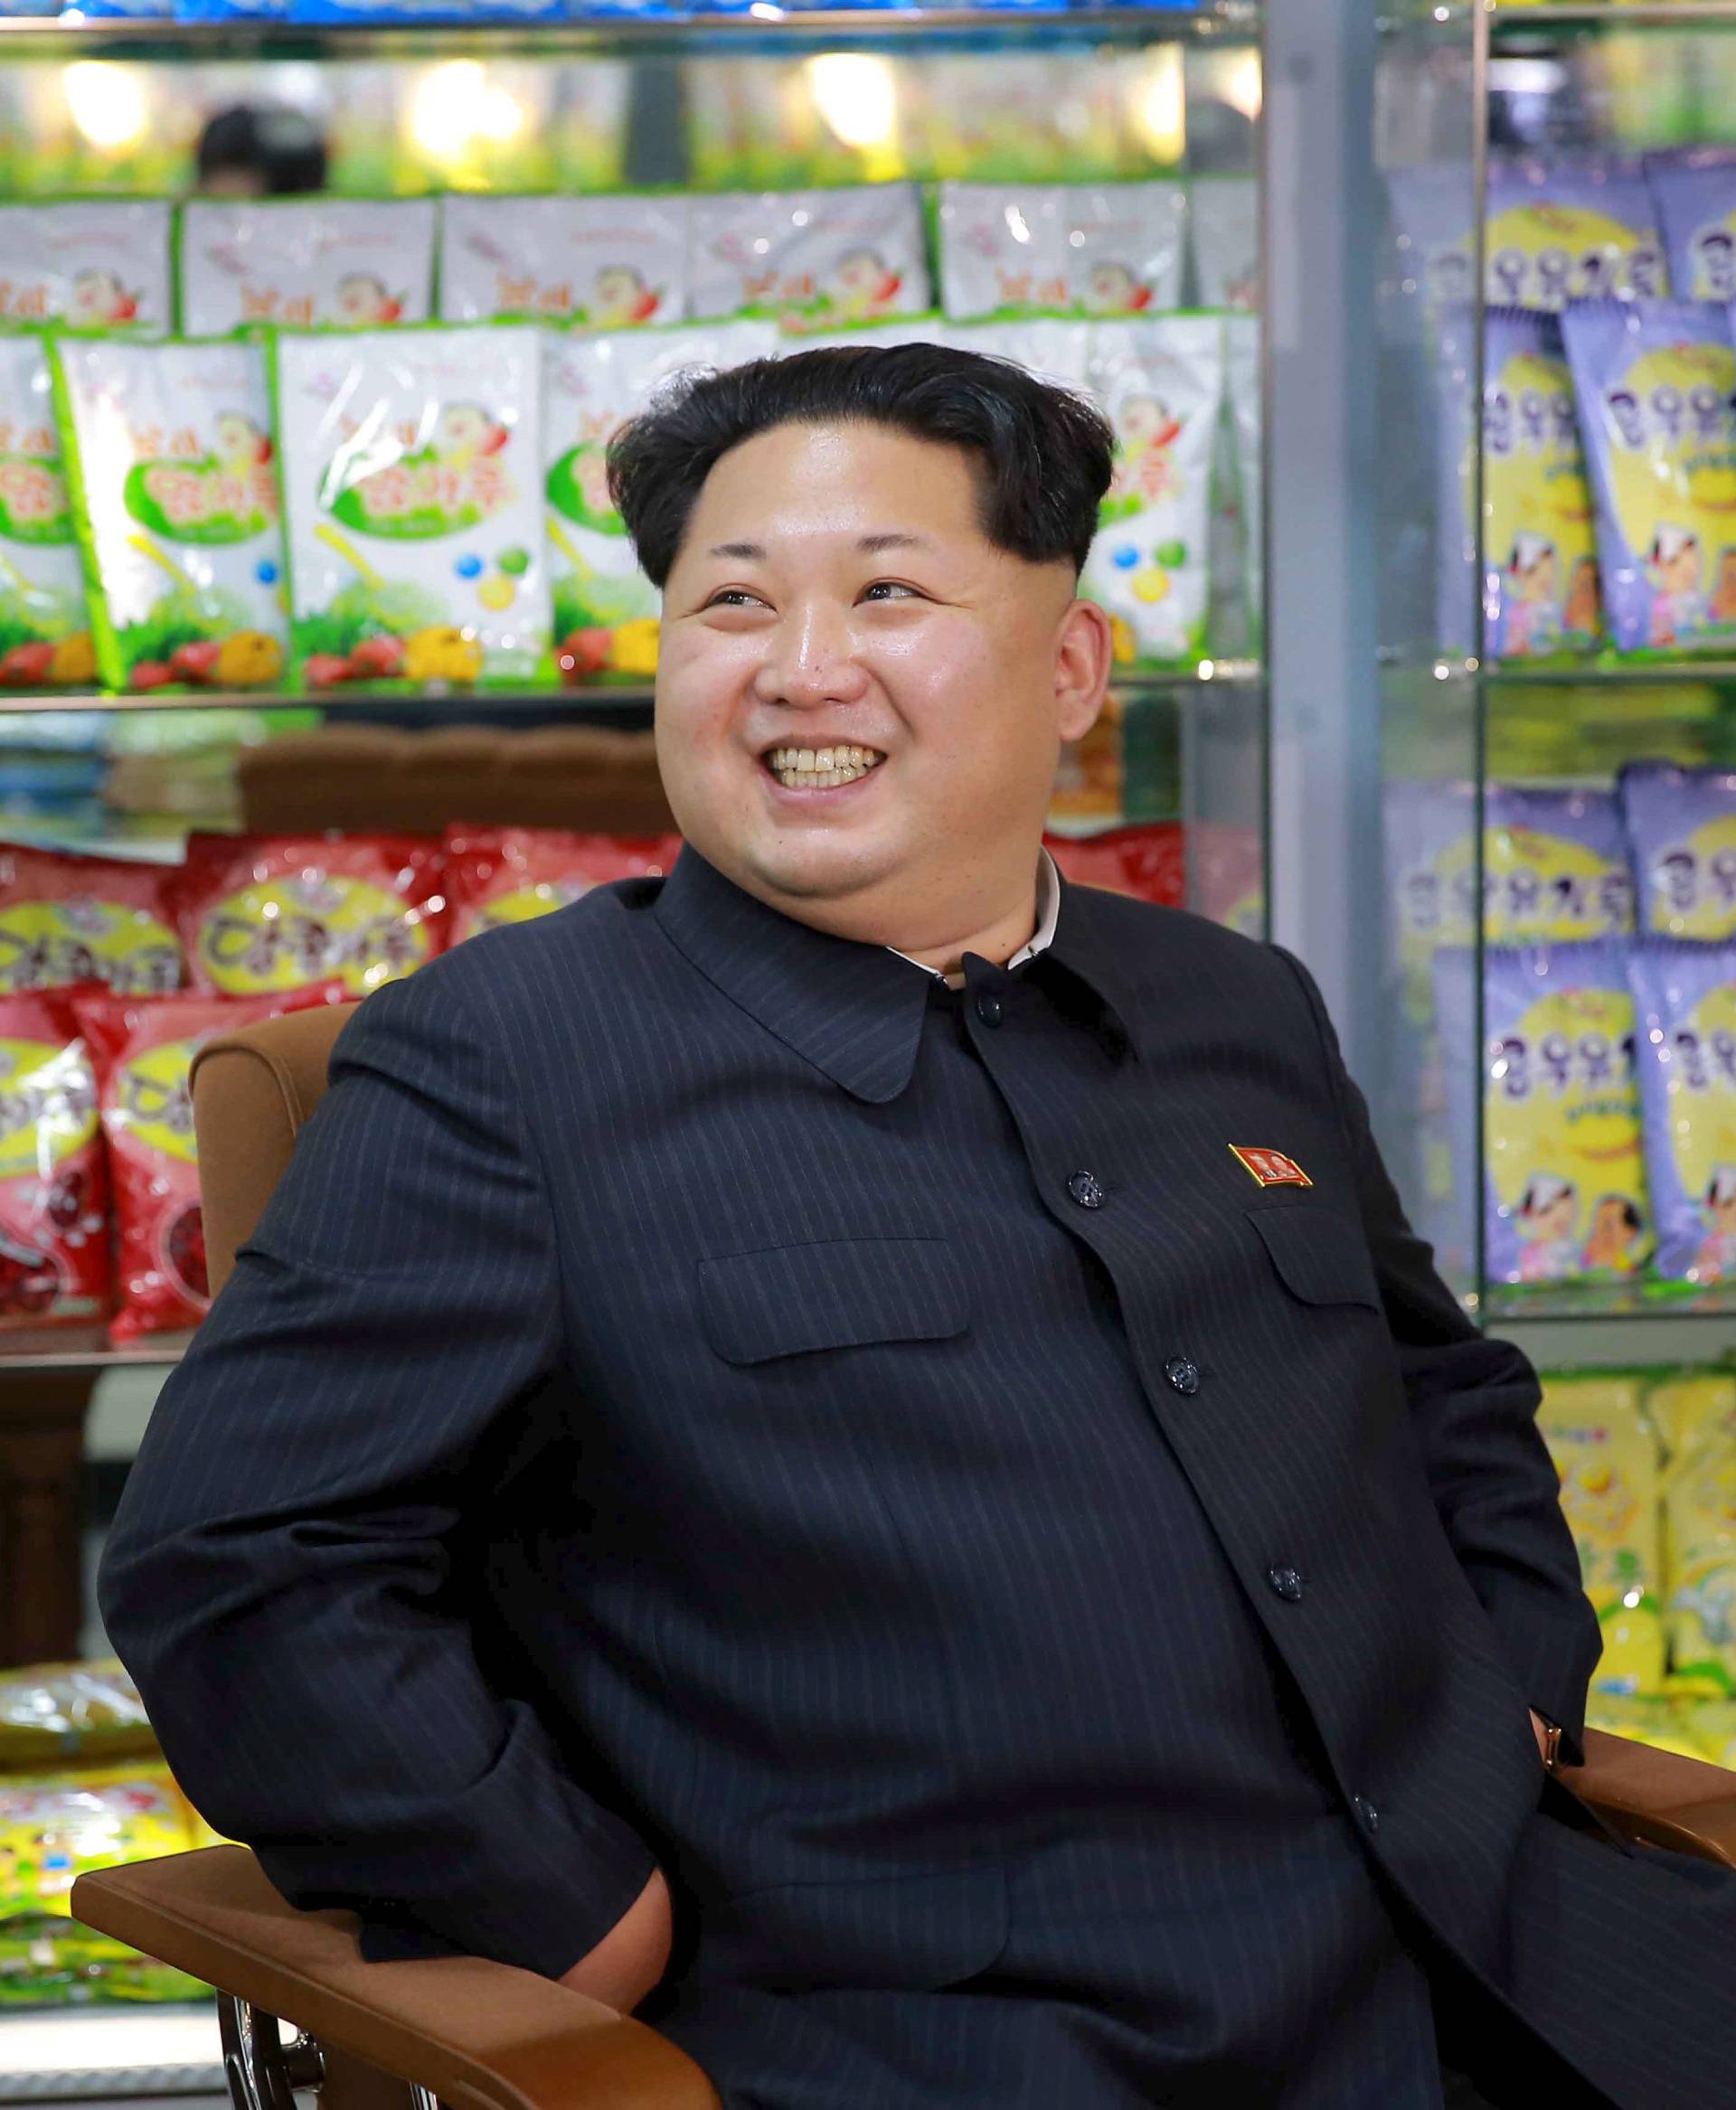 FILE PHOTO: KCNA picture shows North Korean leader Kim Jong Un smiling while sitting during a visit to inspect the Pyongyang Children's Foodstuff Factory